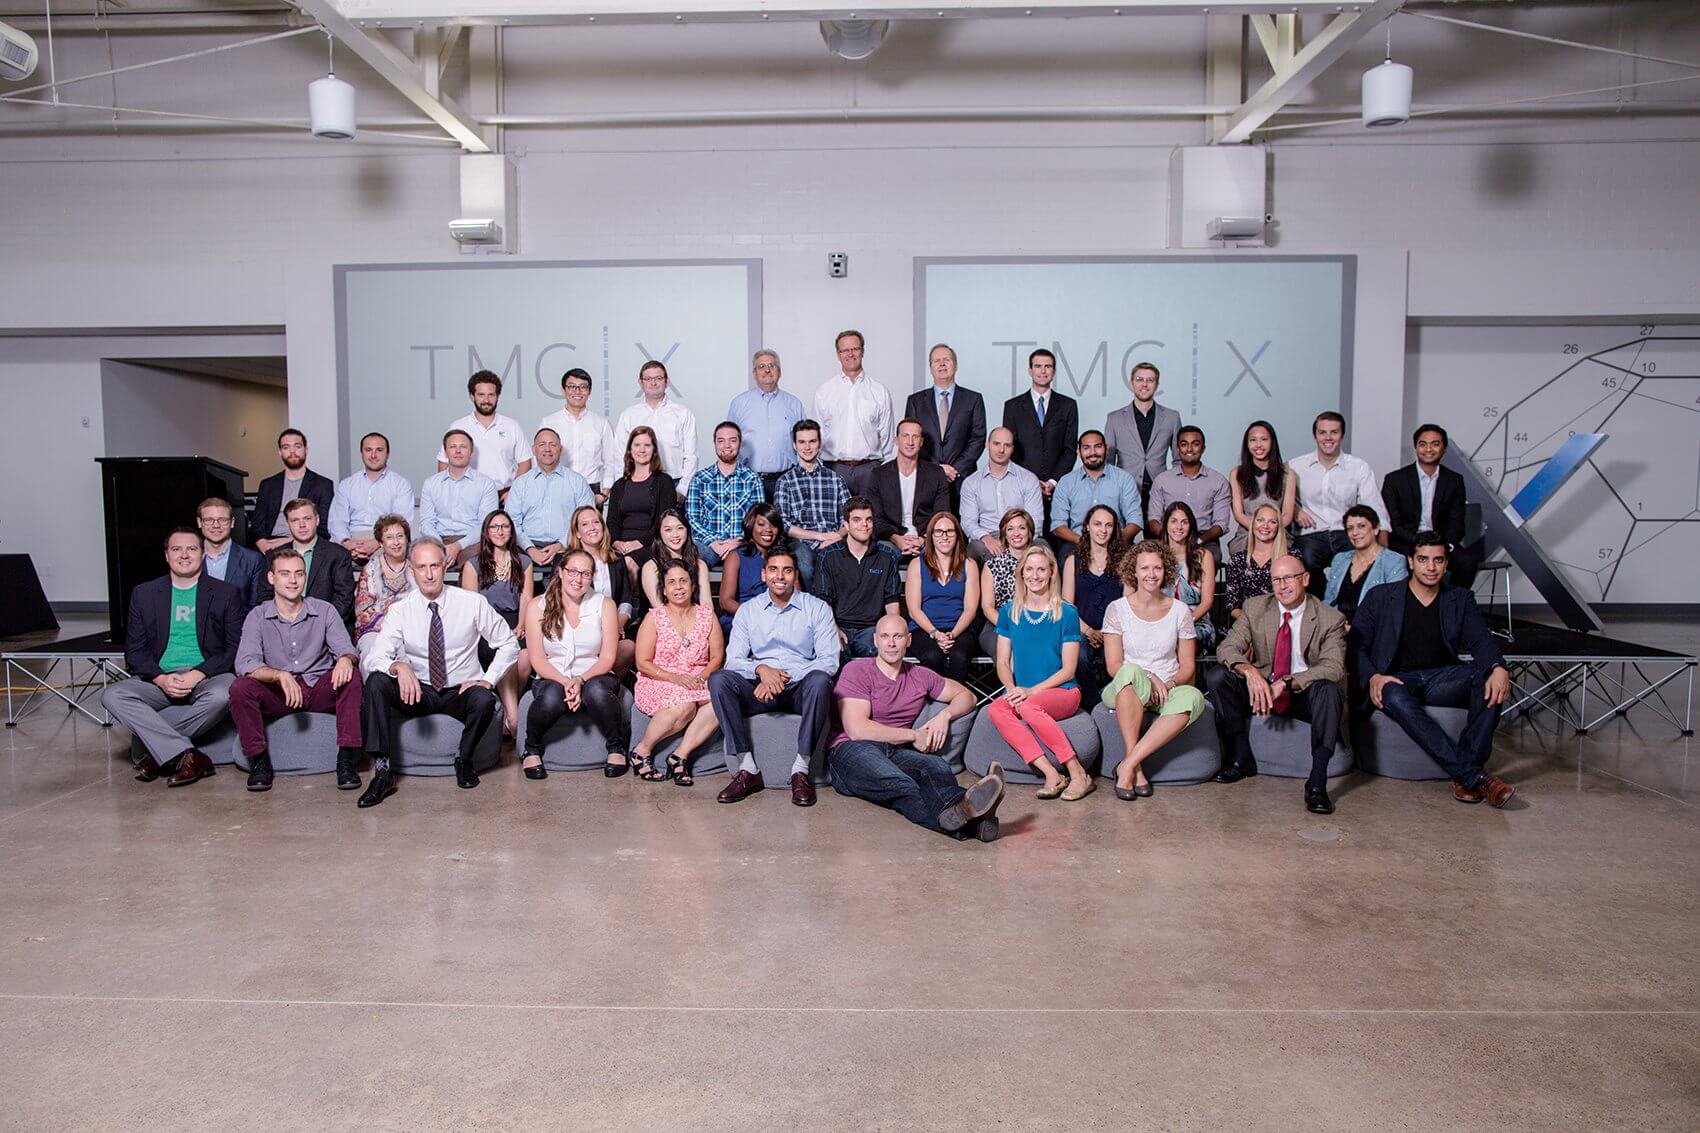 For the first class of TMCx, composed of 21 companies from all across the globe and pictured here alongside TMCx staff, their efforts to refine their businesses and showcase their solutions all came together on Demo Day.